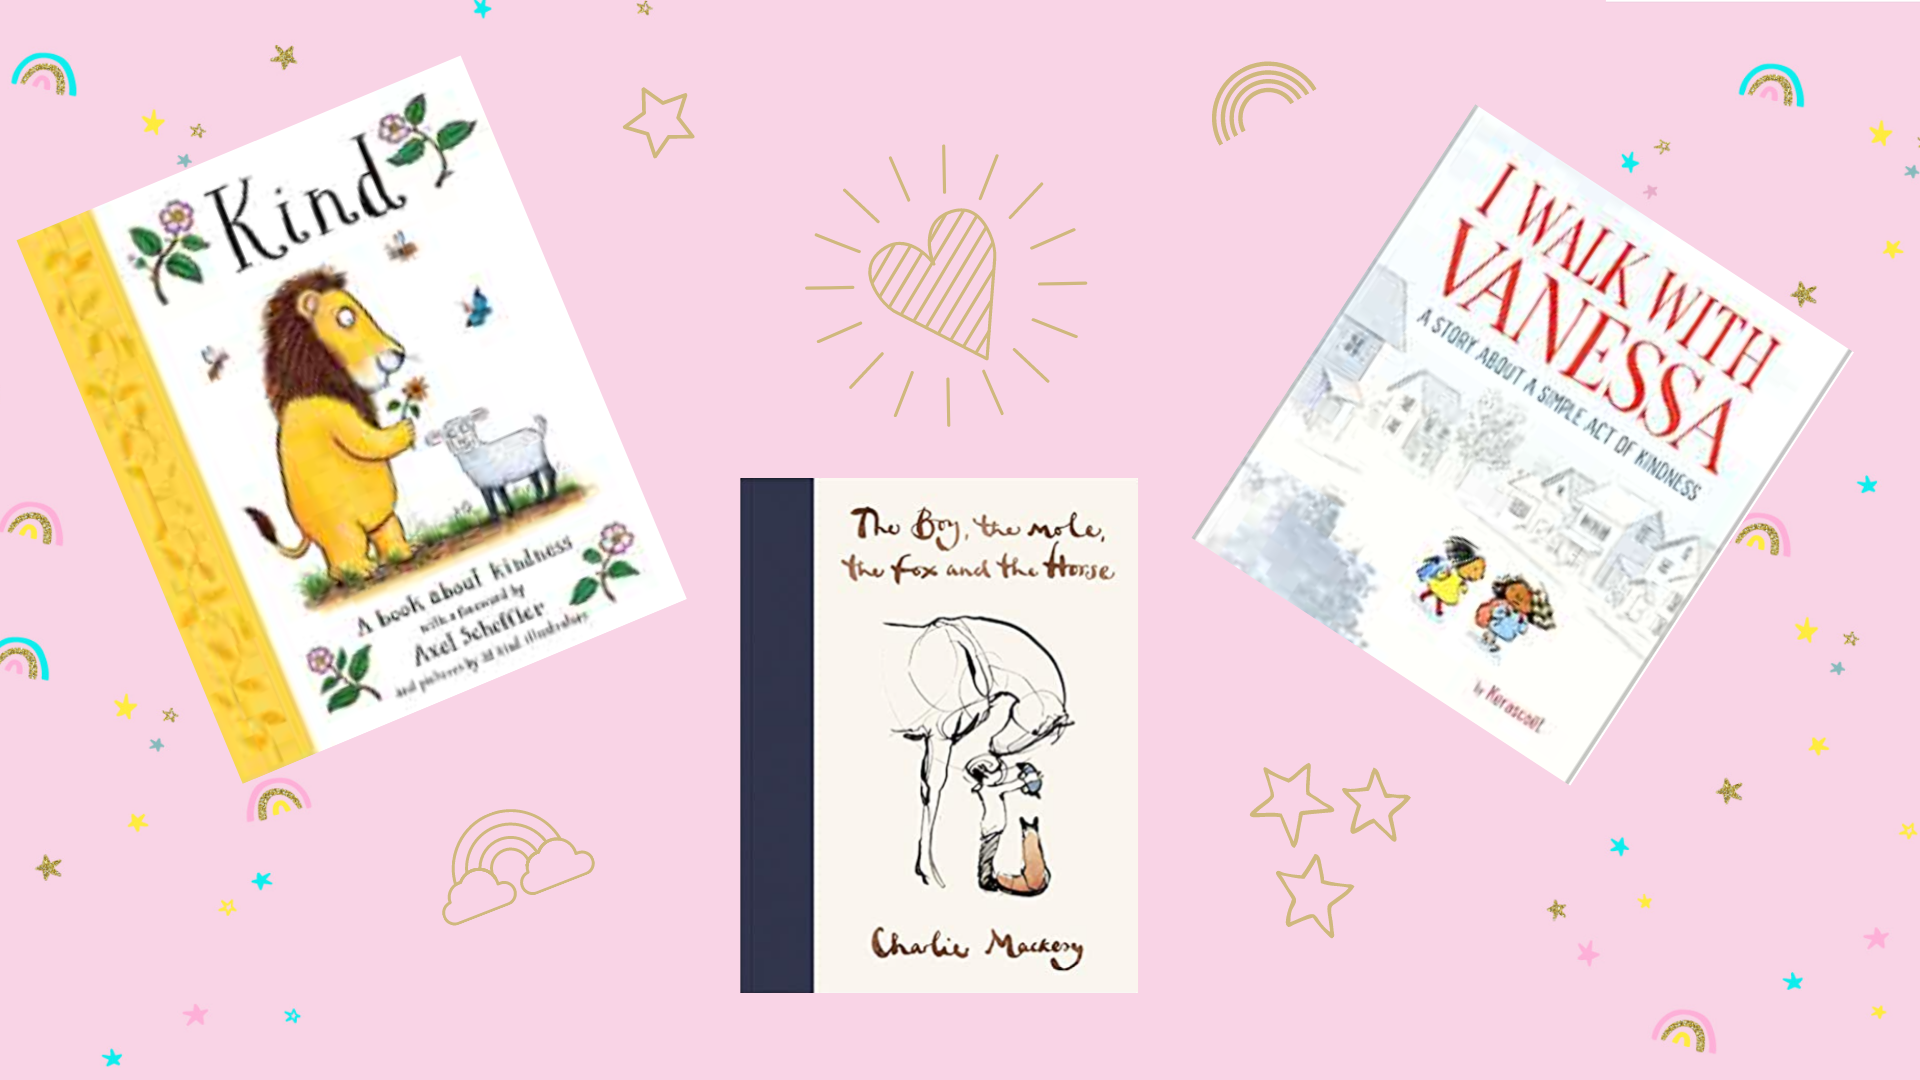 The cover pages of the following books: Kind, I Walk with Vanessa and The Boy, The Mole, The Fox and The Horse.